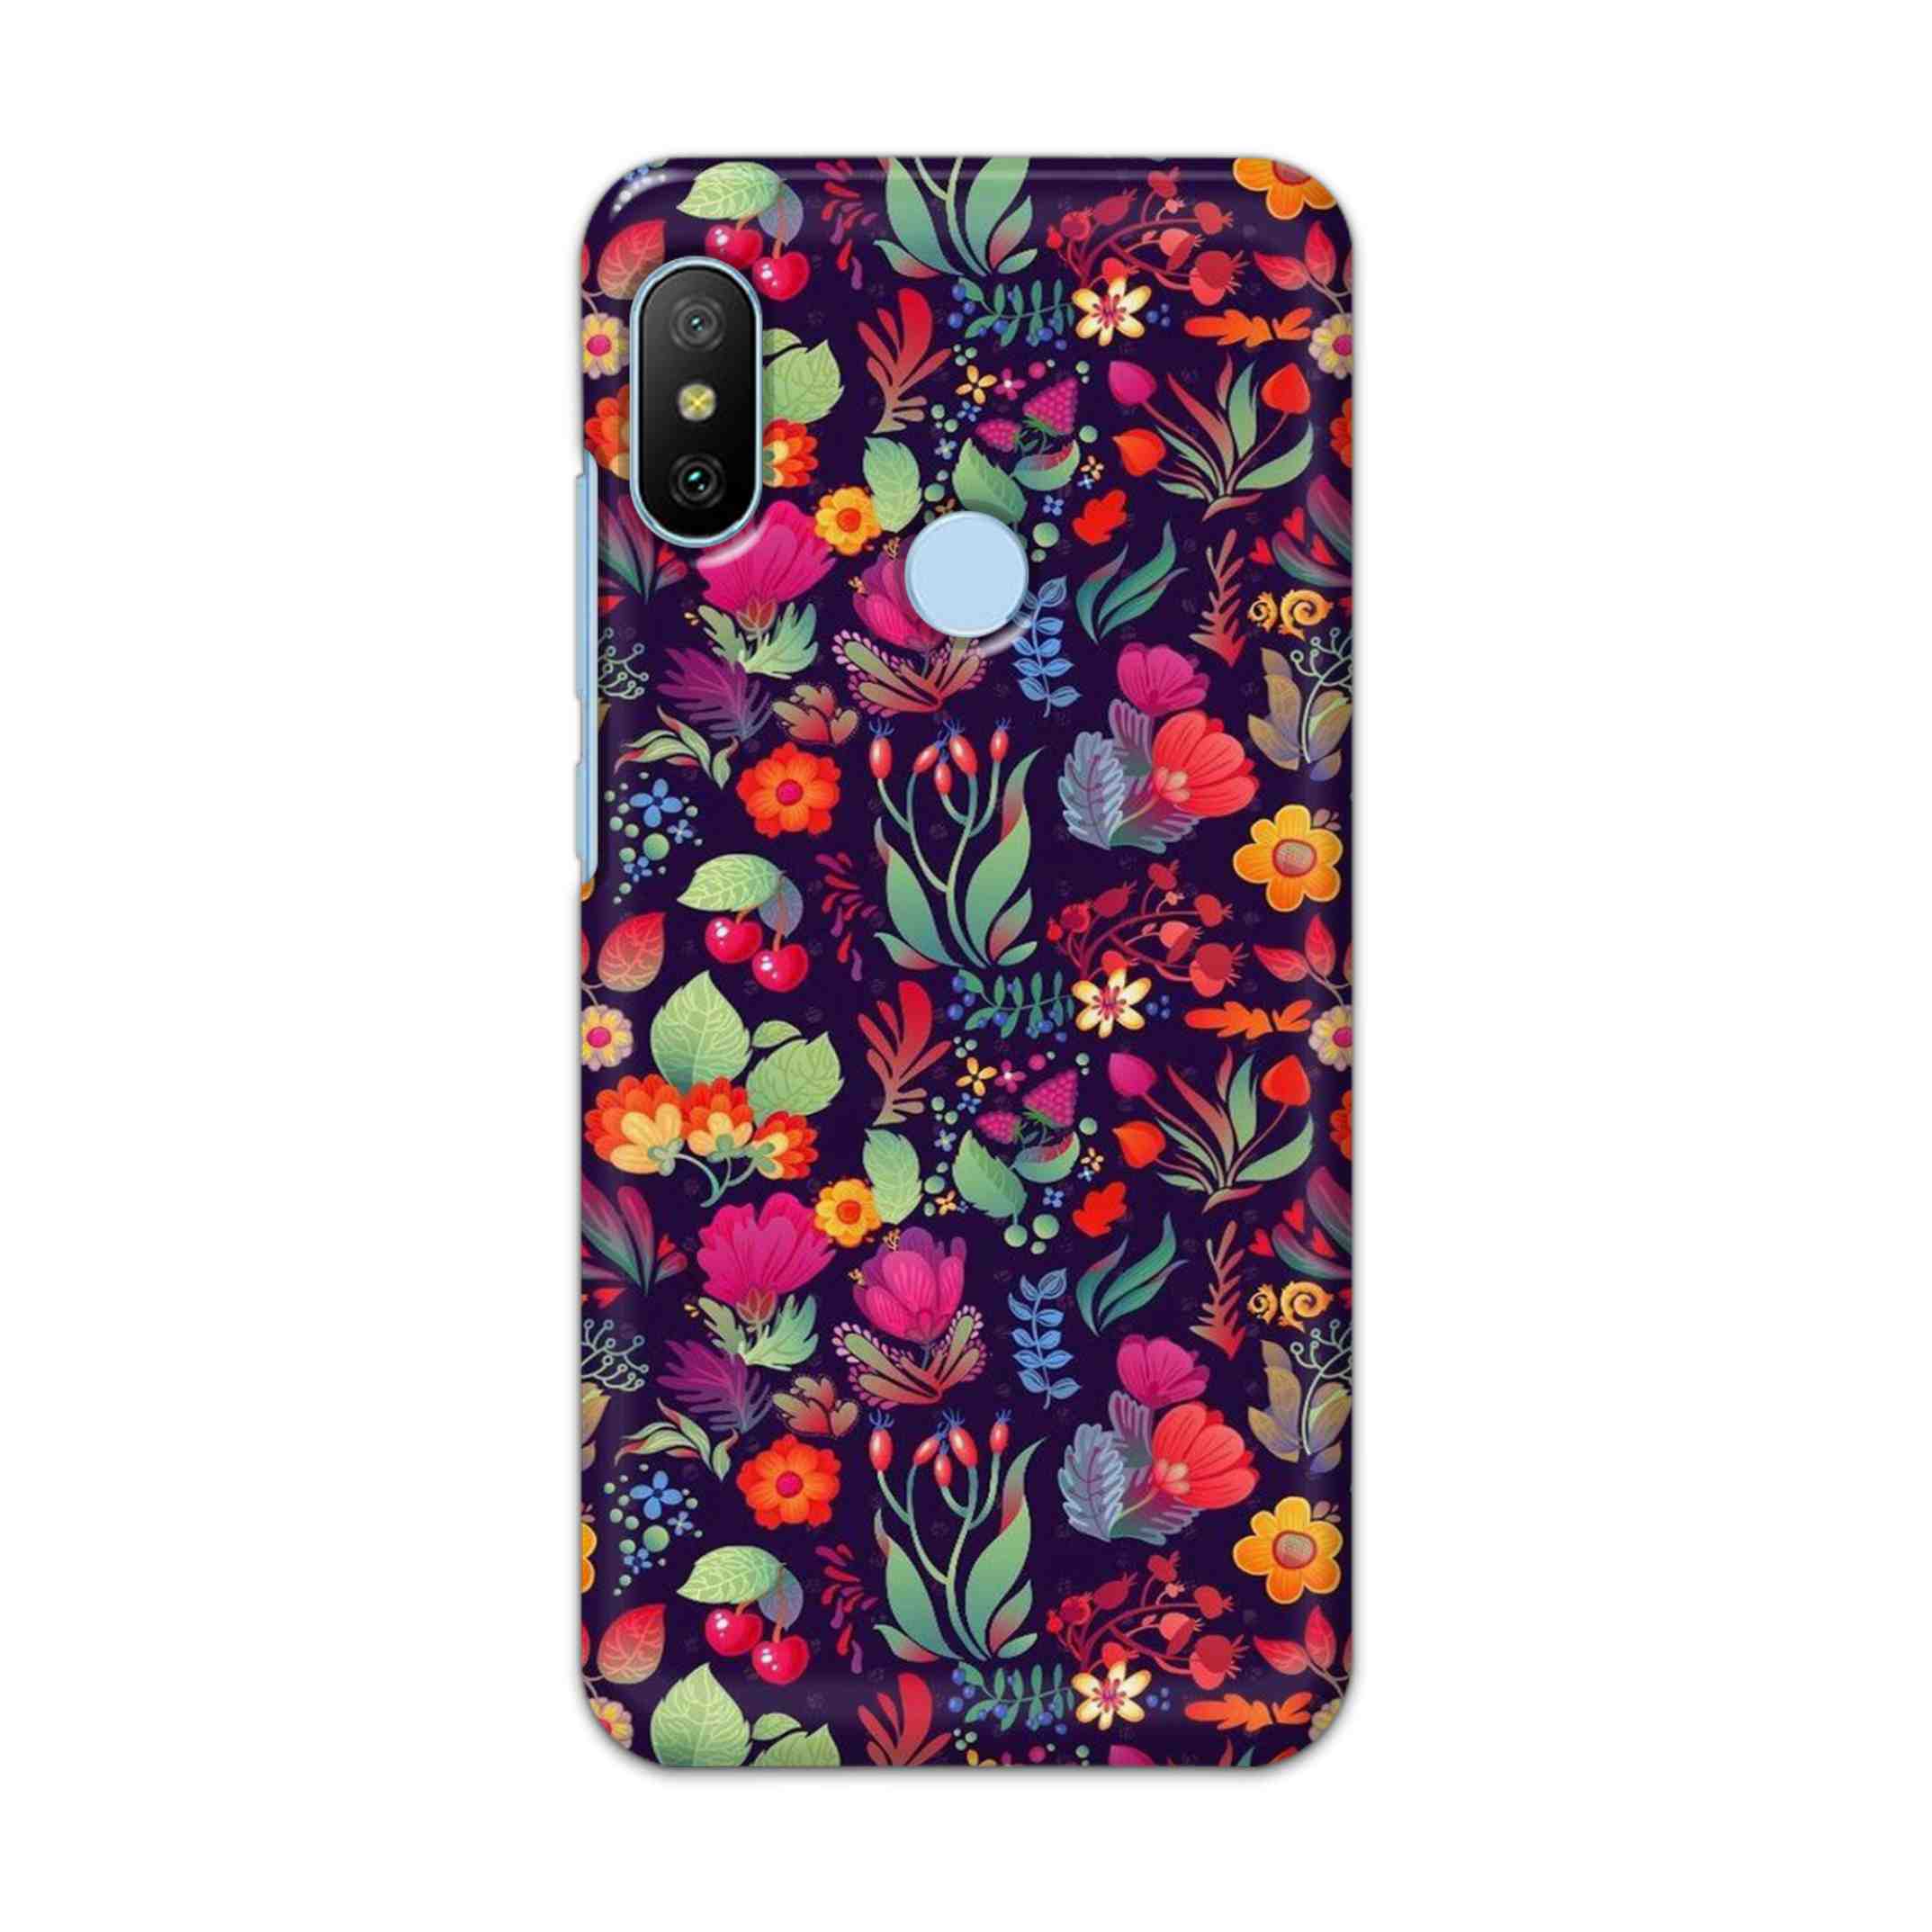 Buy Fruits Flower Hard Back Mobile Phone Case/Cover For Xiaomi Redmi 6 Pro Online